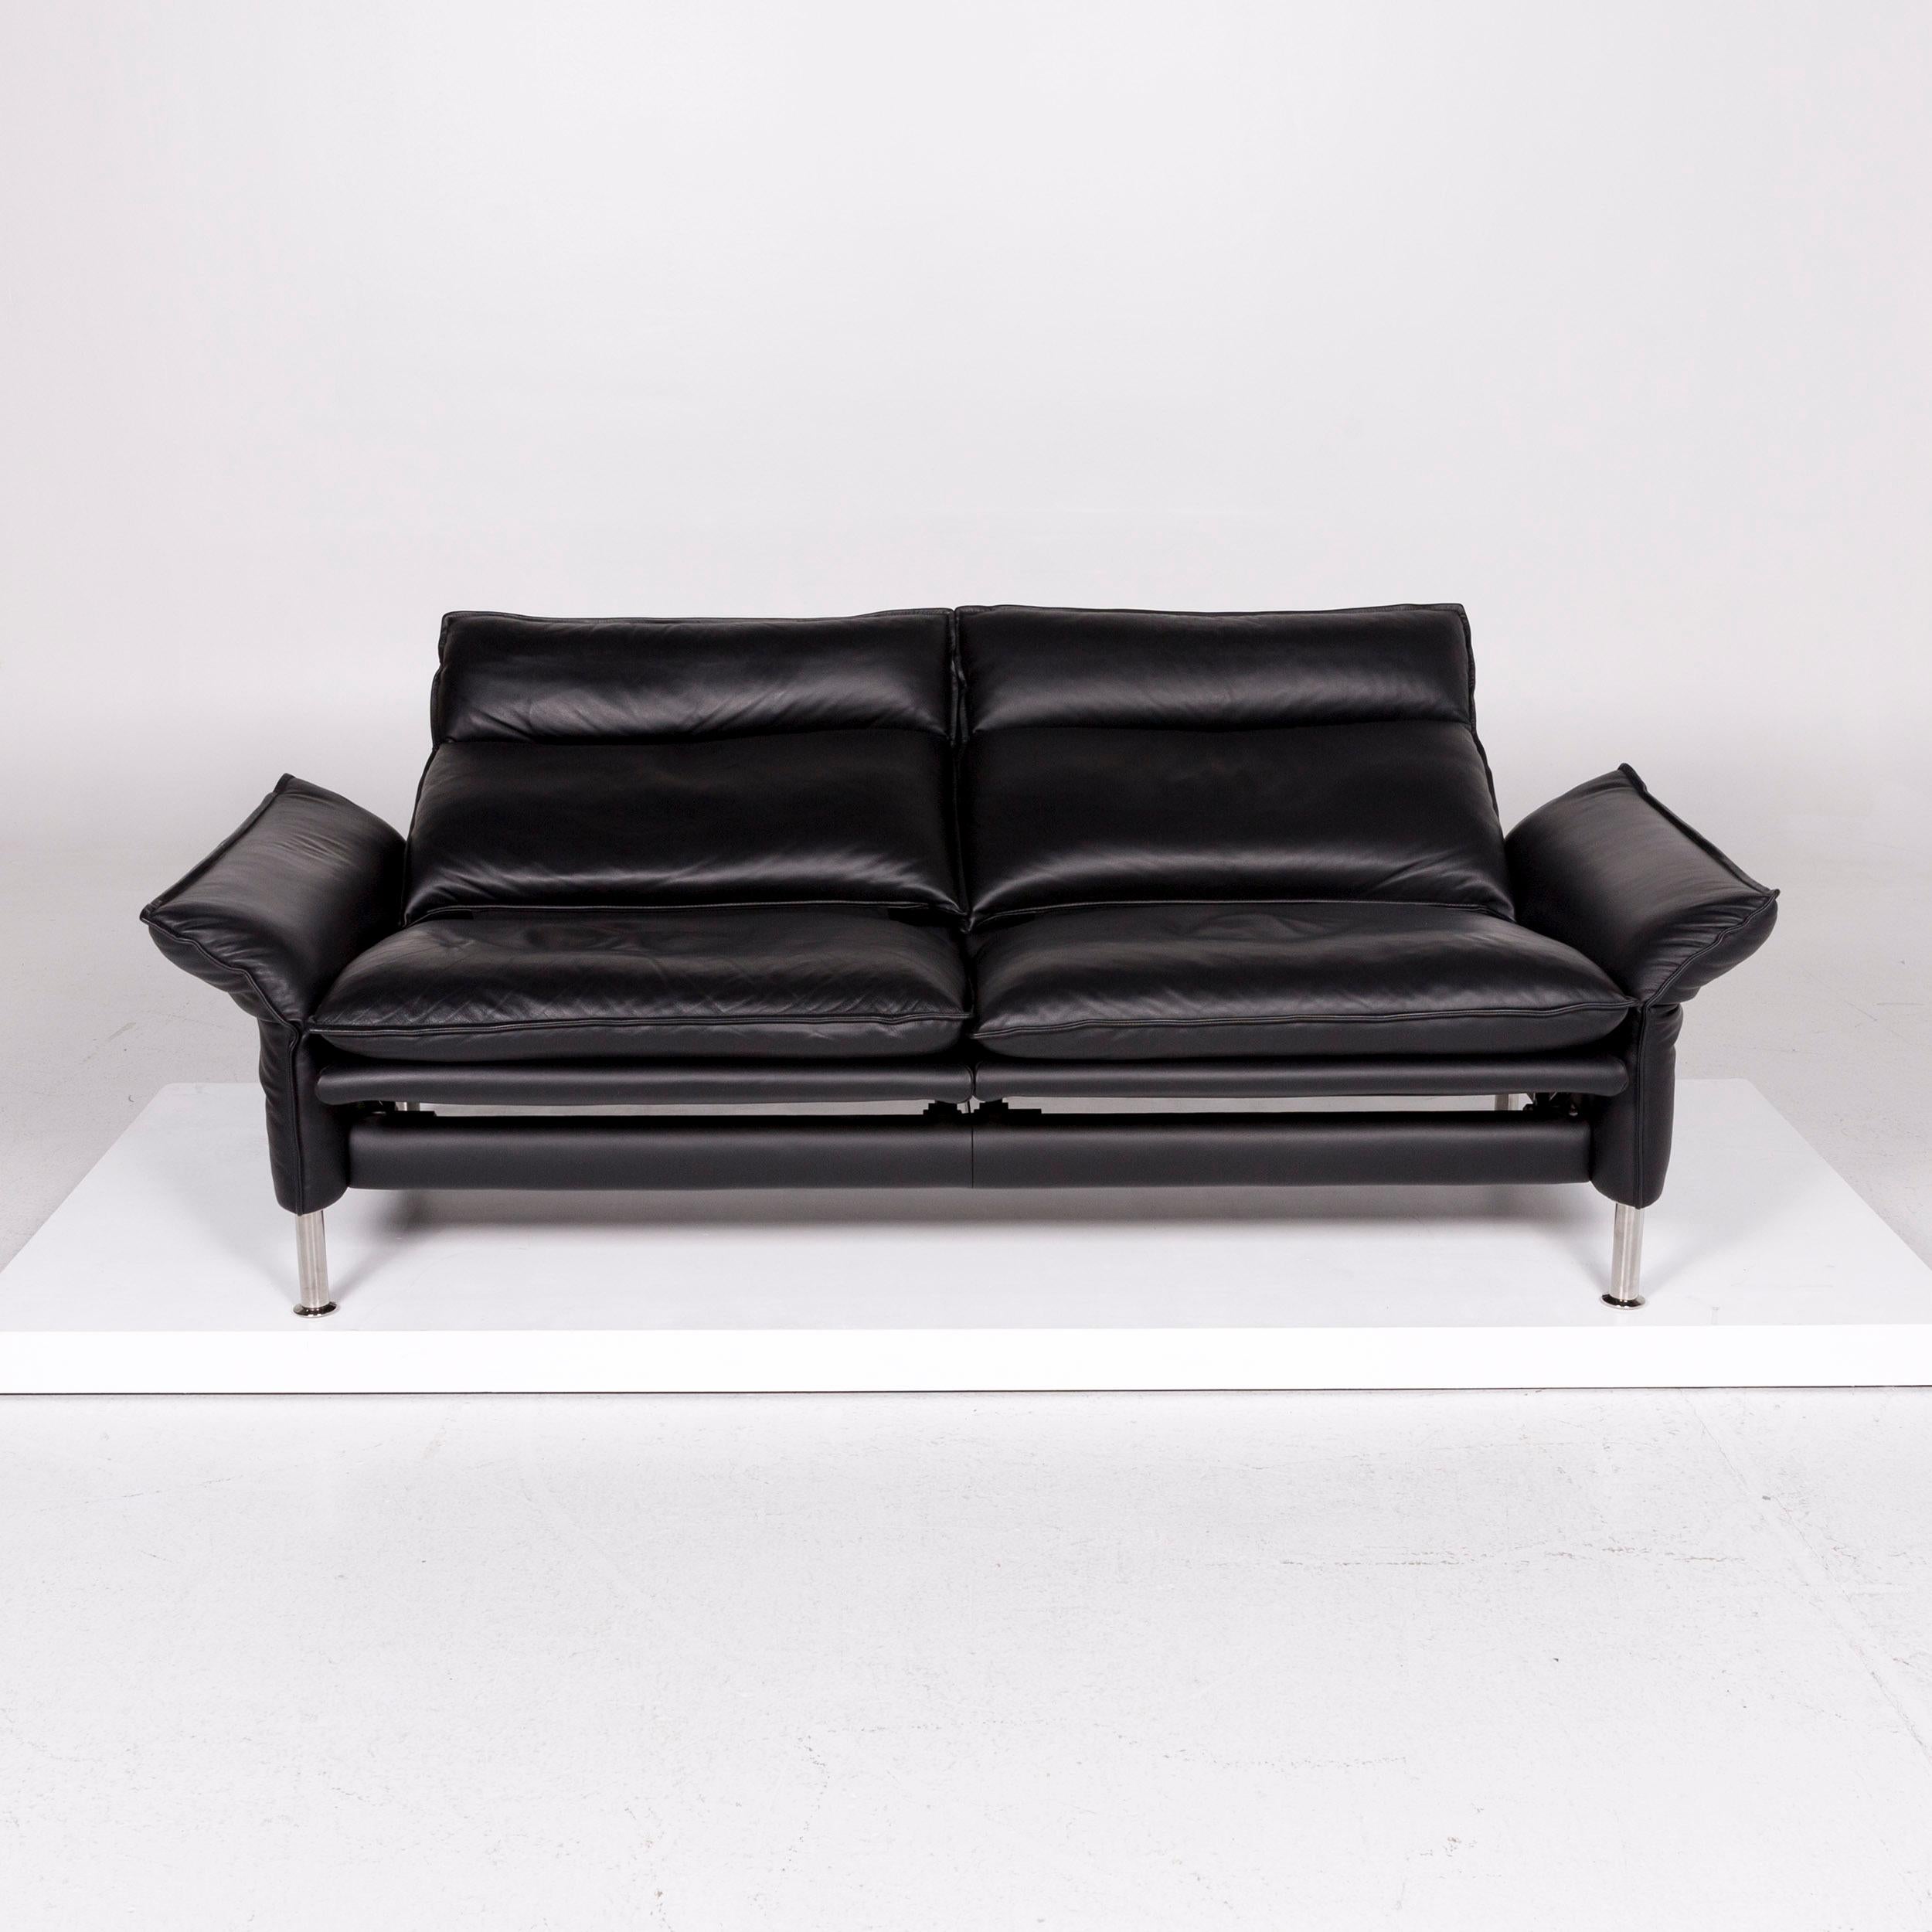 Modern Erpo Porto Leather Sofa Black Two-Seat Relax Function Couch